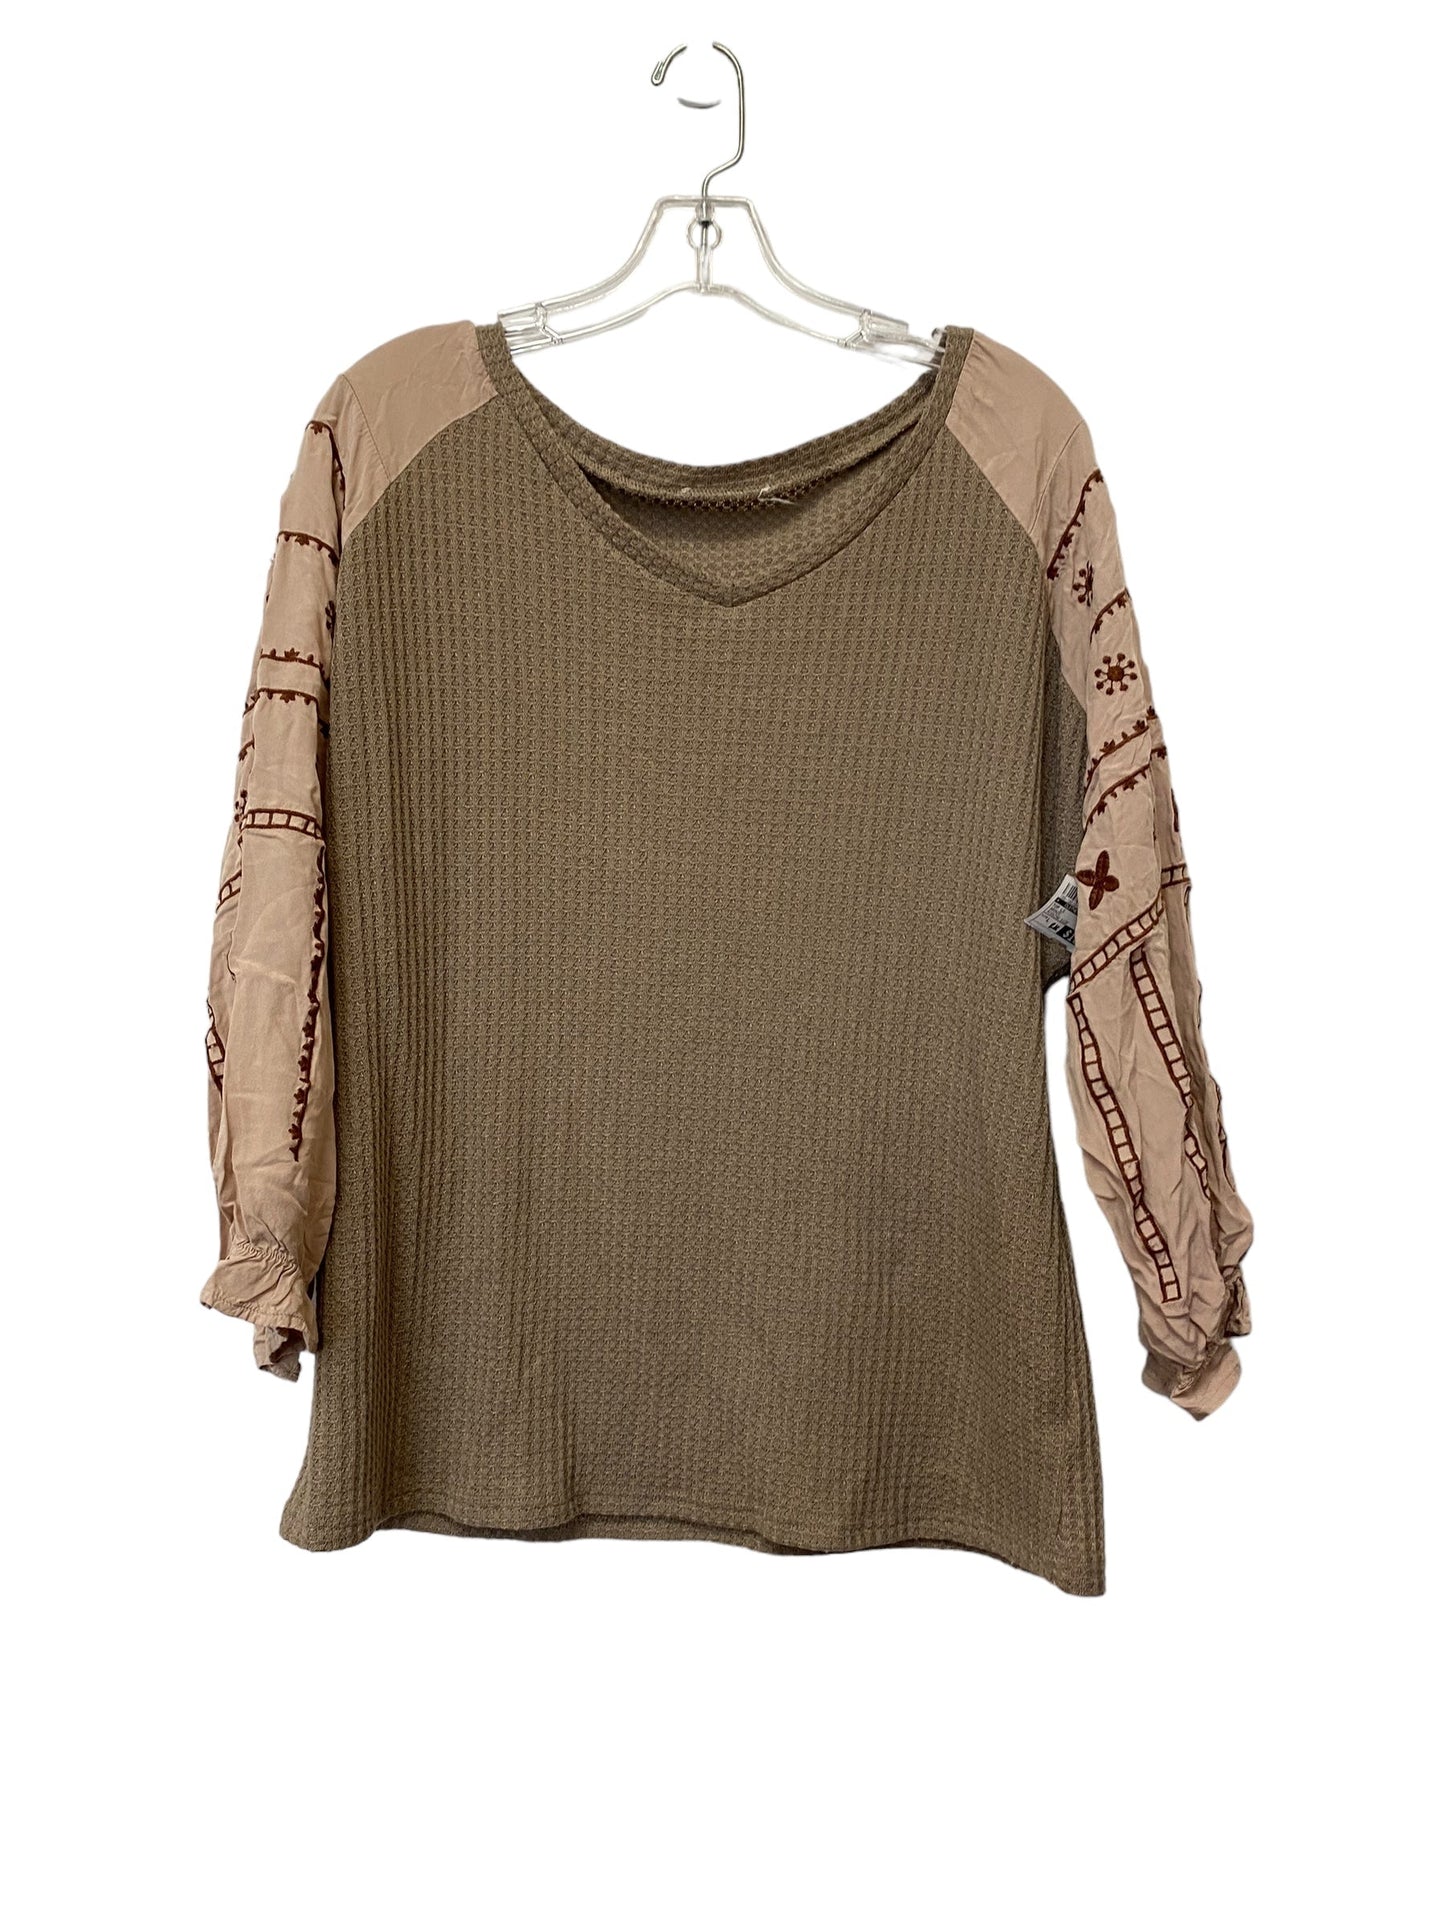 Bronze Top Long Sleeve Clothes Mentor, Size L